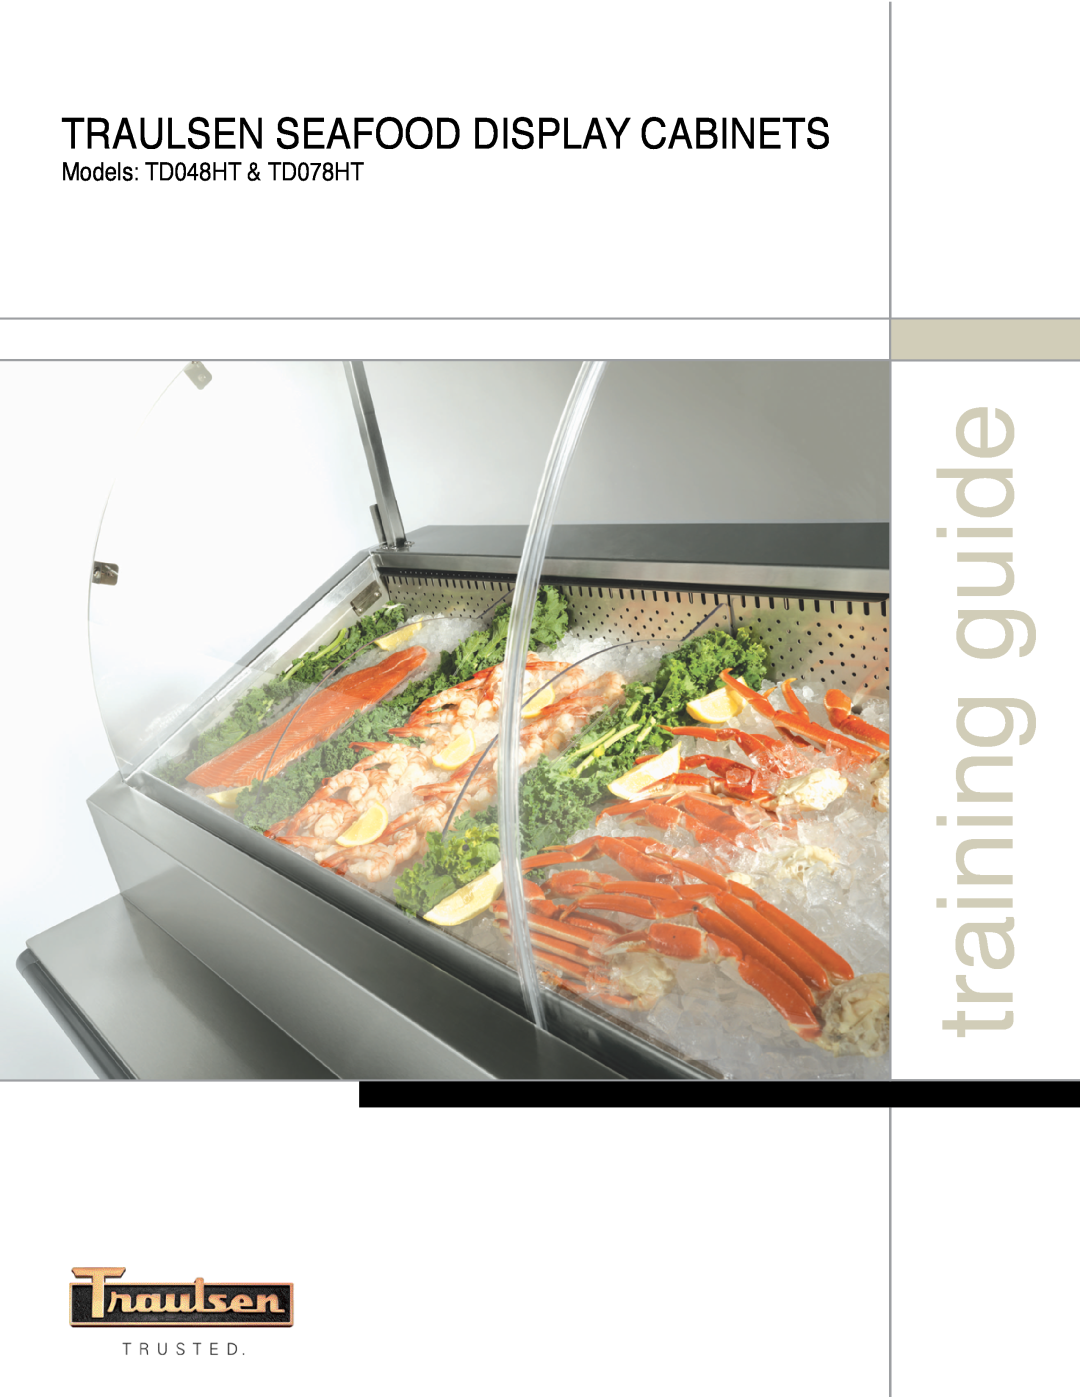 Traulsen manual training guide, Traulsen Seafood Display Cabinets, Models TD048HT & TD078HT 